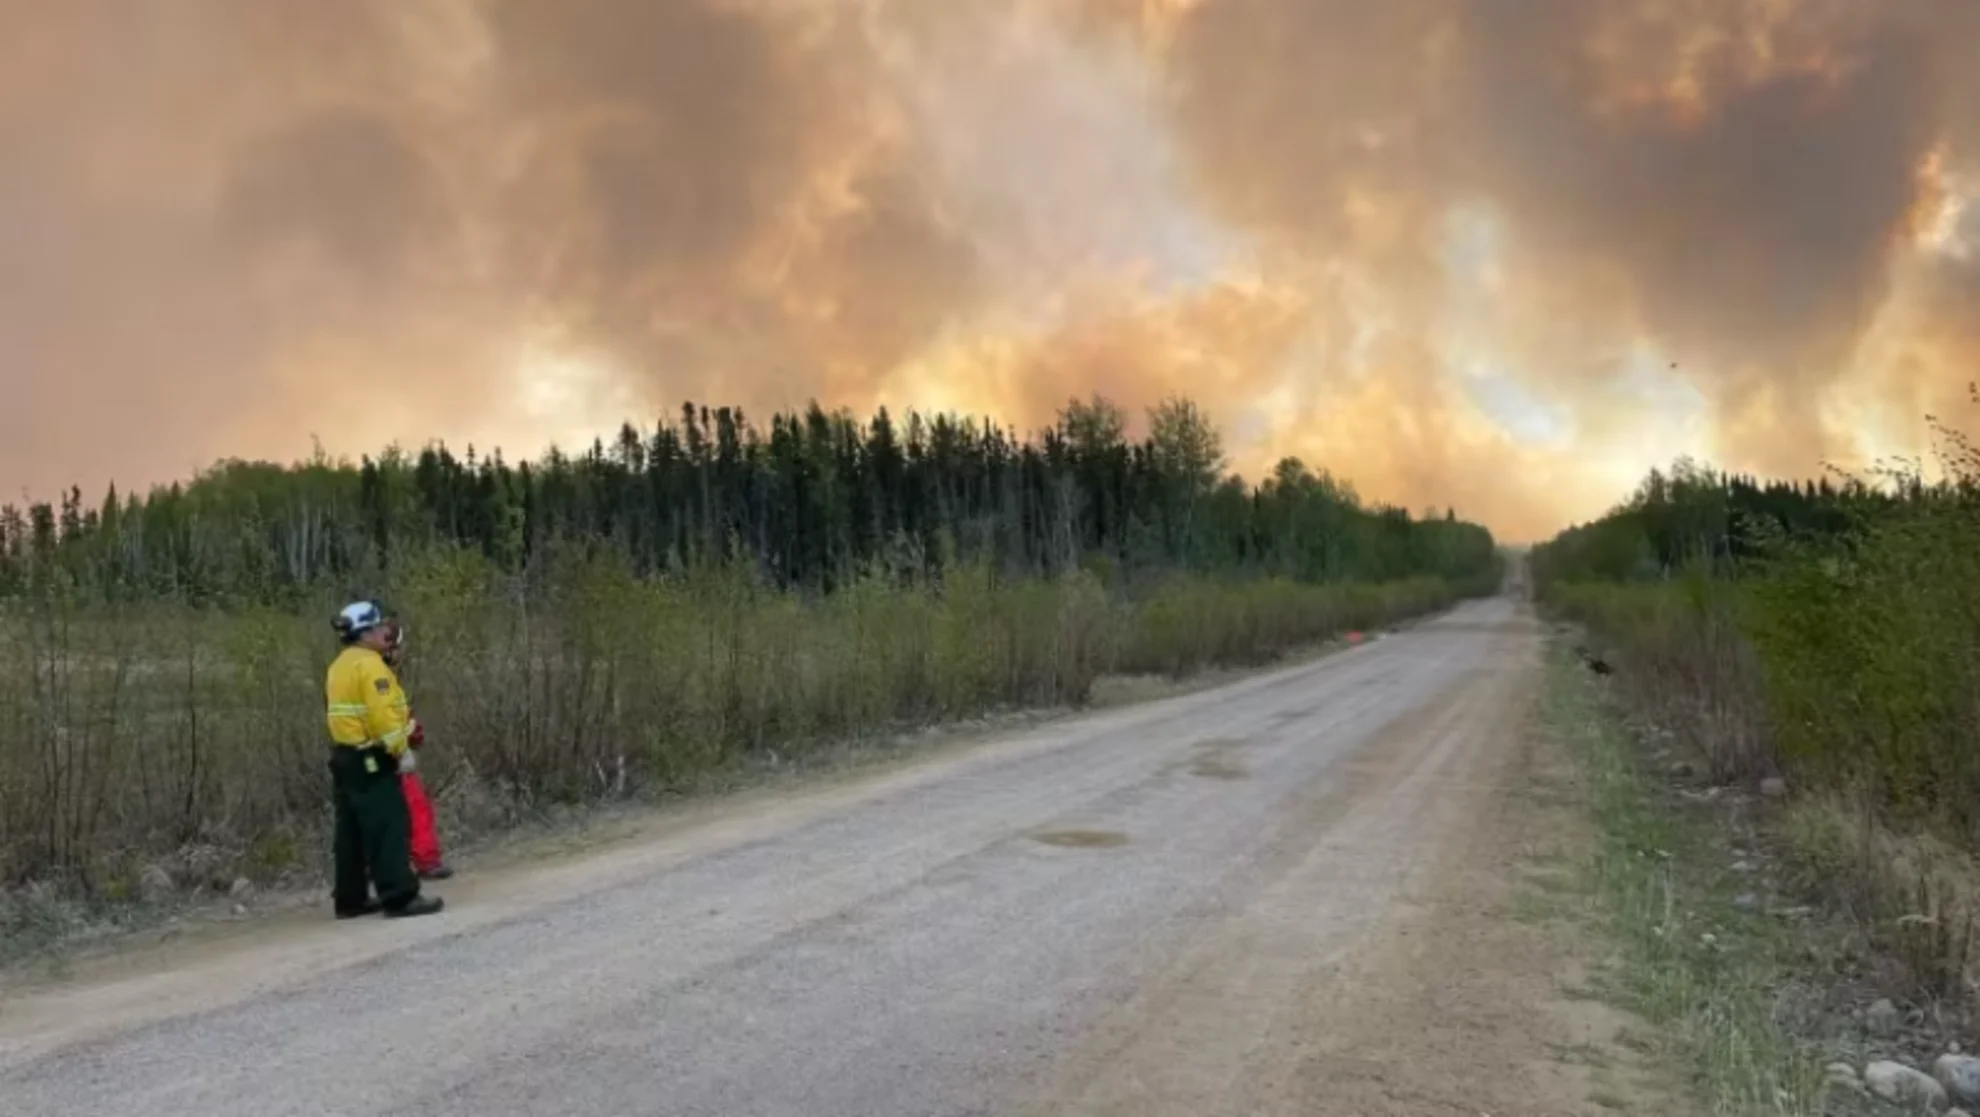 Prince Albert sounds alarm on wildfire season, urges early mitigation measures